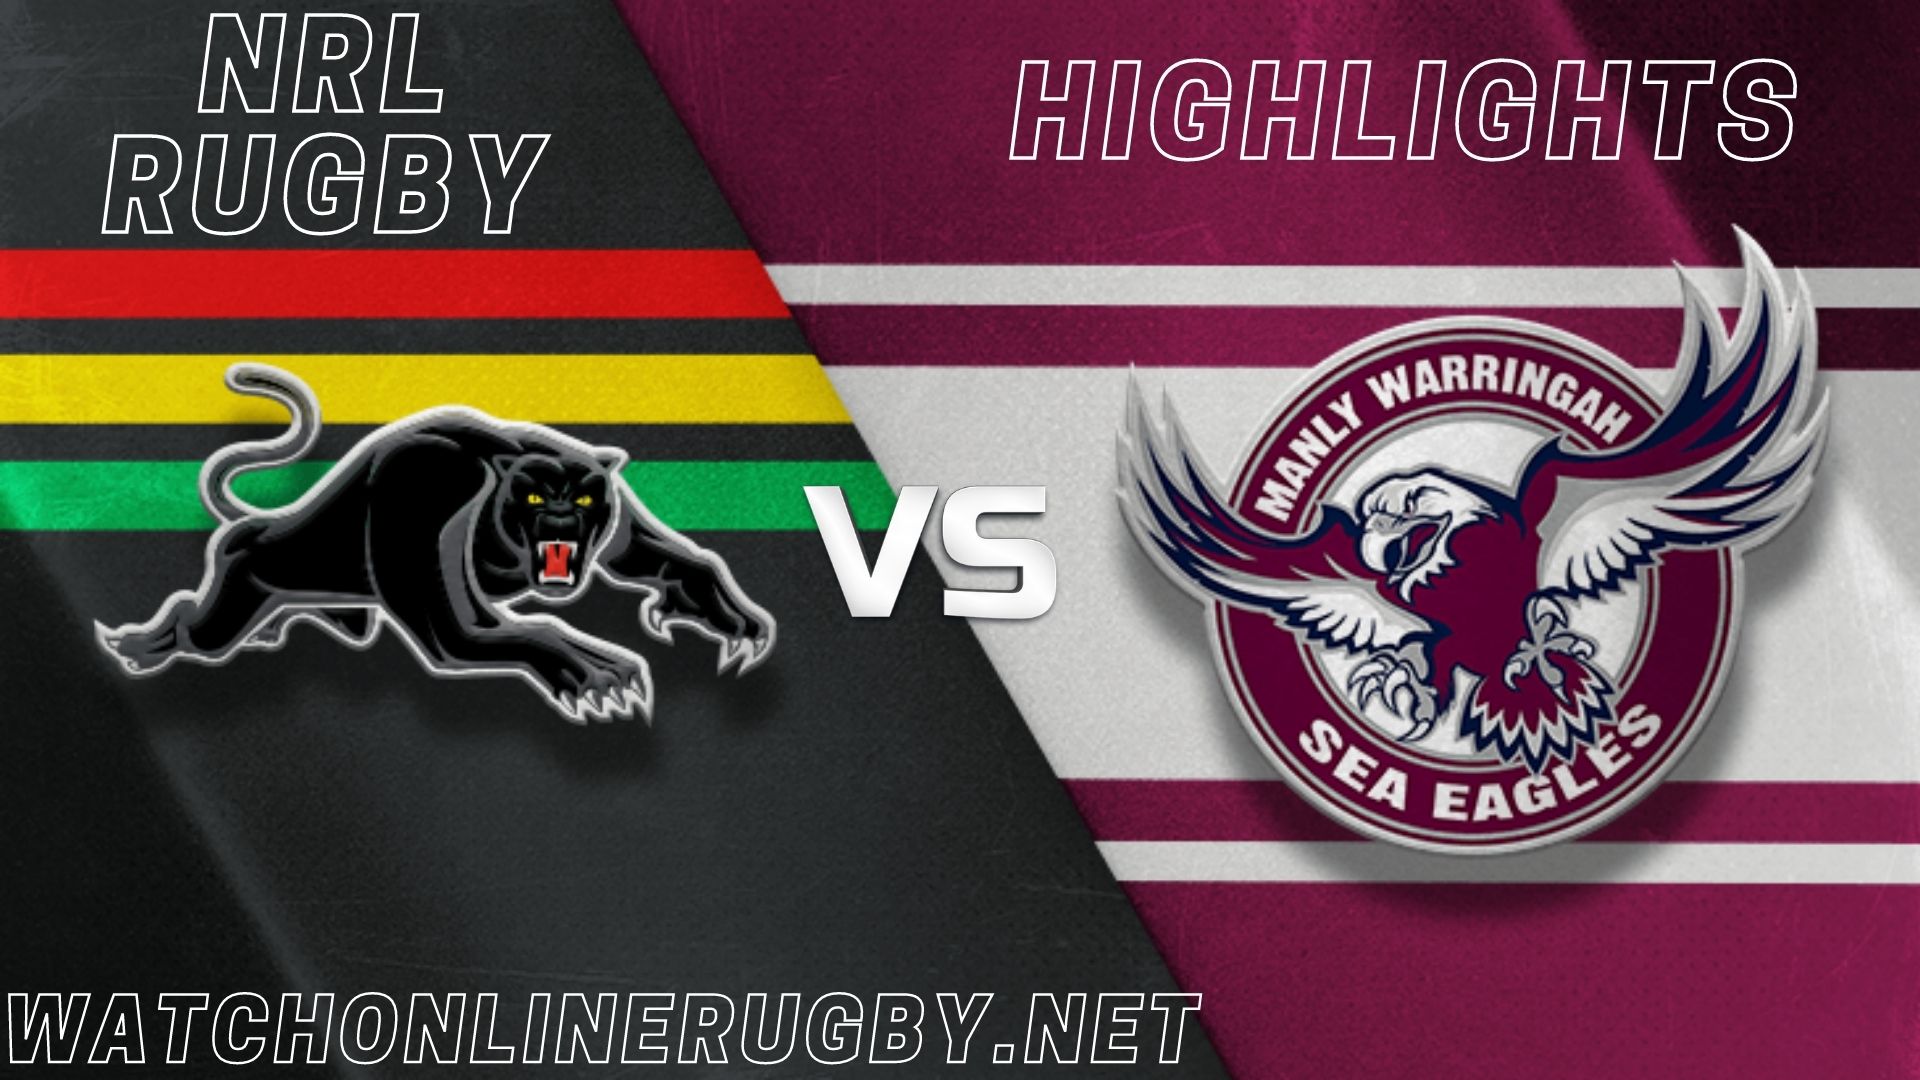 Panthers Vs Sea Eagles Highlights RD 1 NRL Rugby